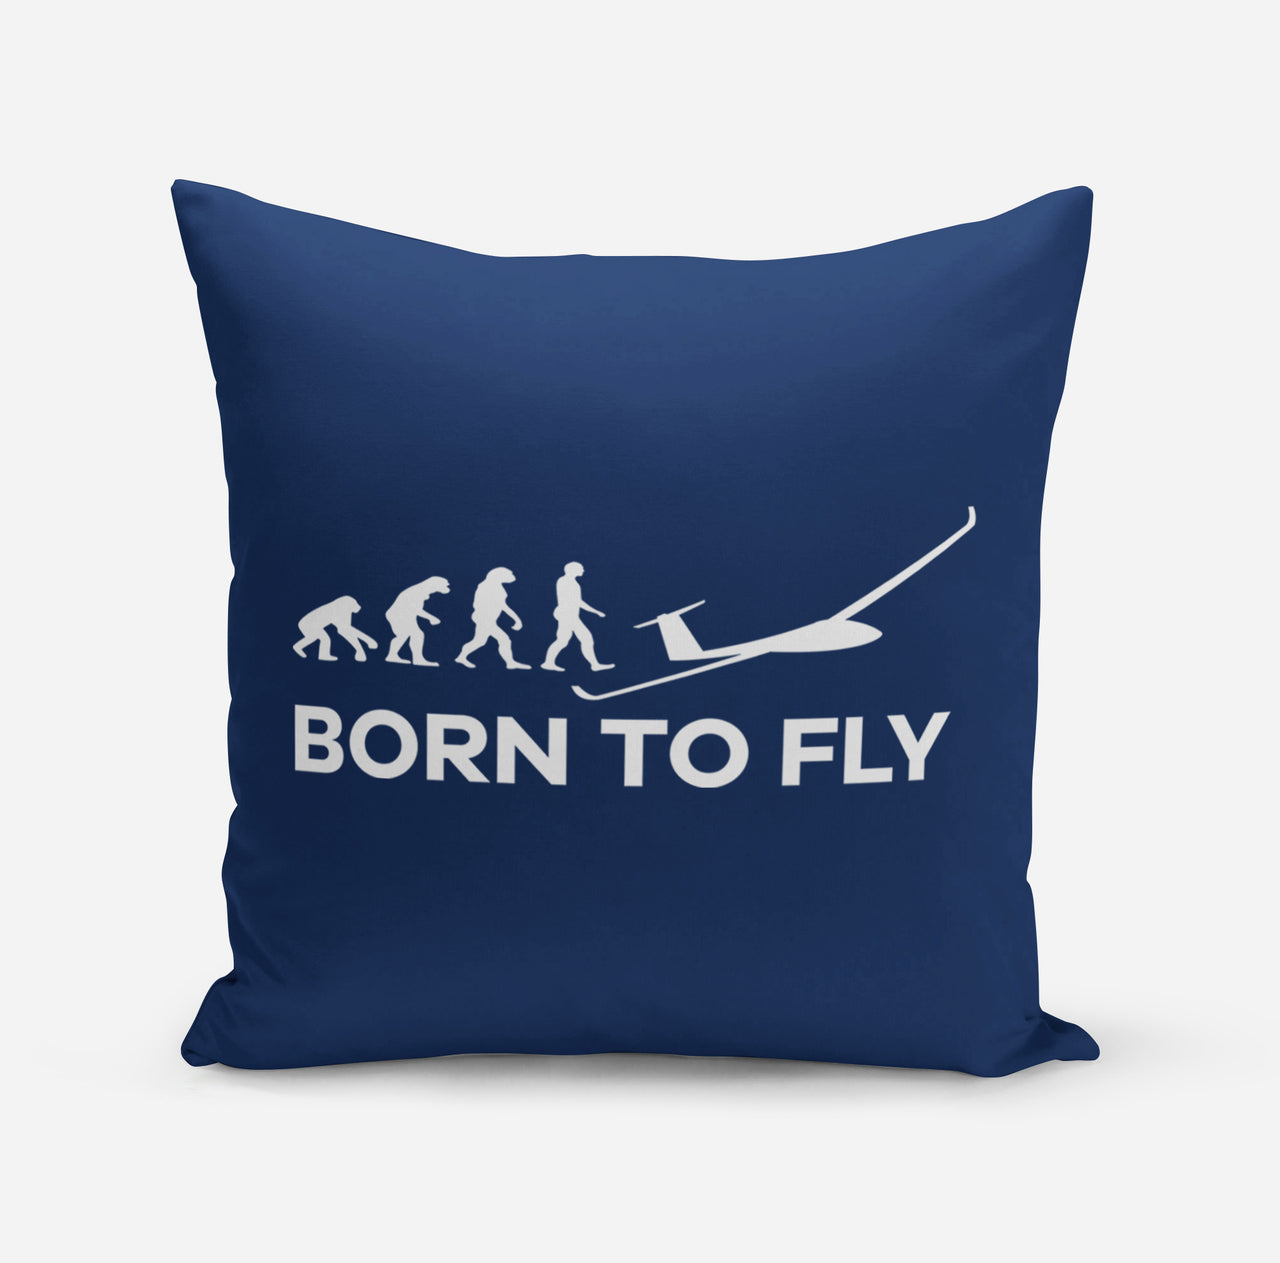 Born To Fly Glider Designed Pillows